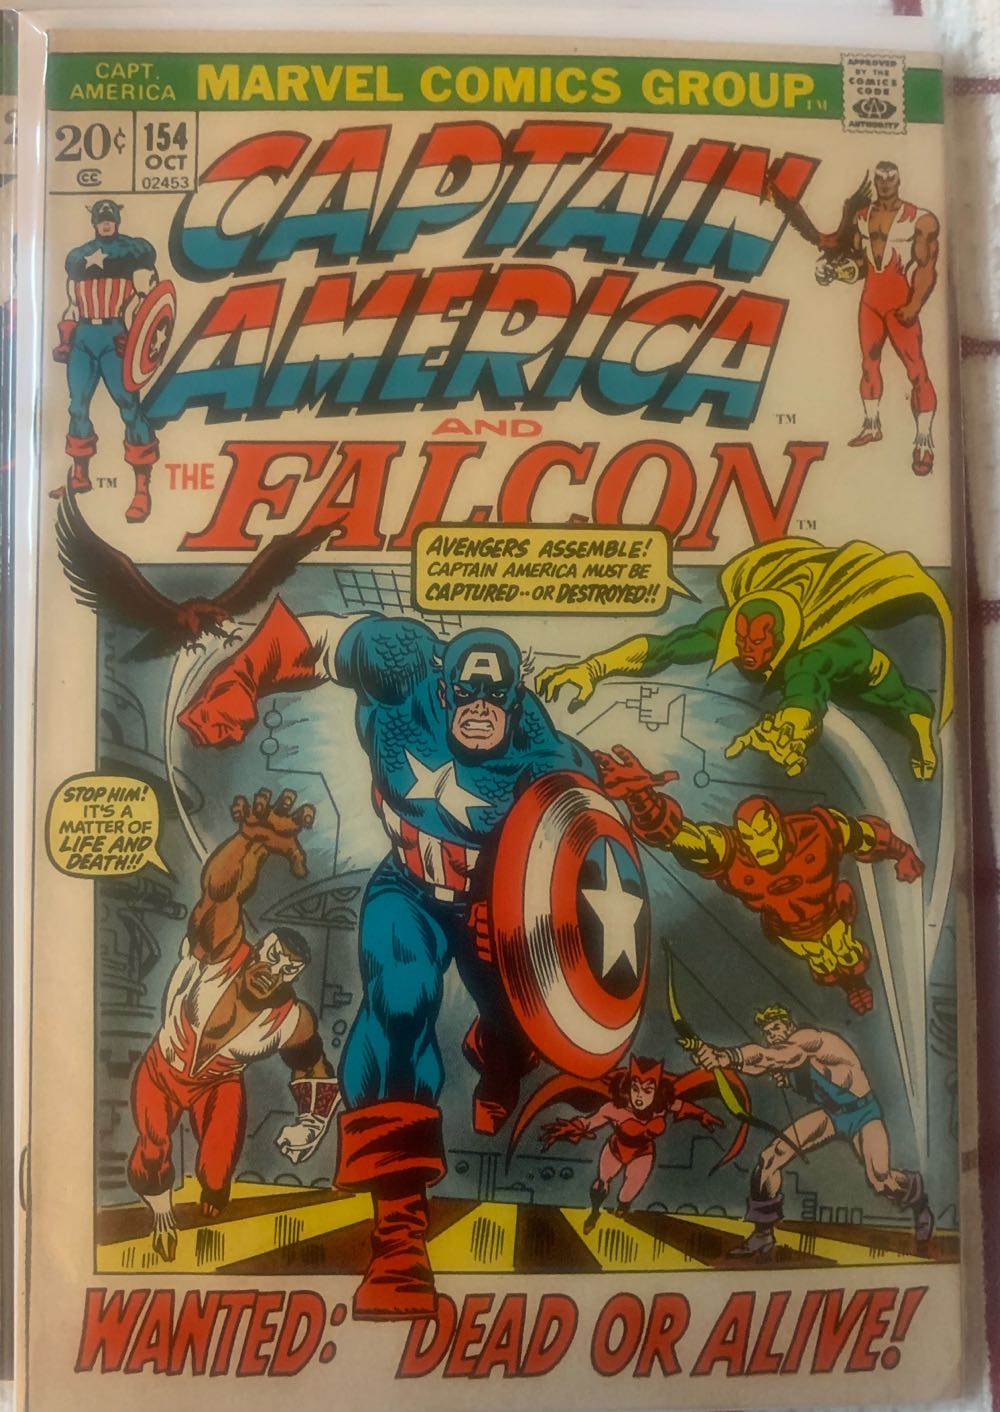 Captain America (Vol. 1) - Marvel (154 - Oct 1972) comic book collectible [Barcode 744558] - Main Image 2